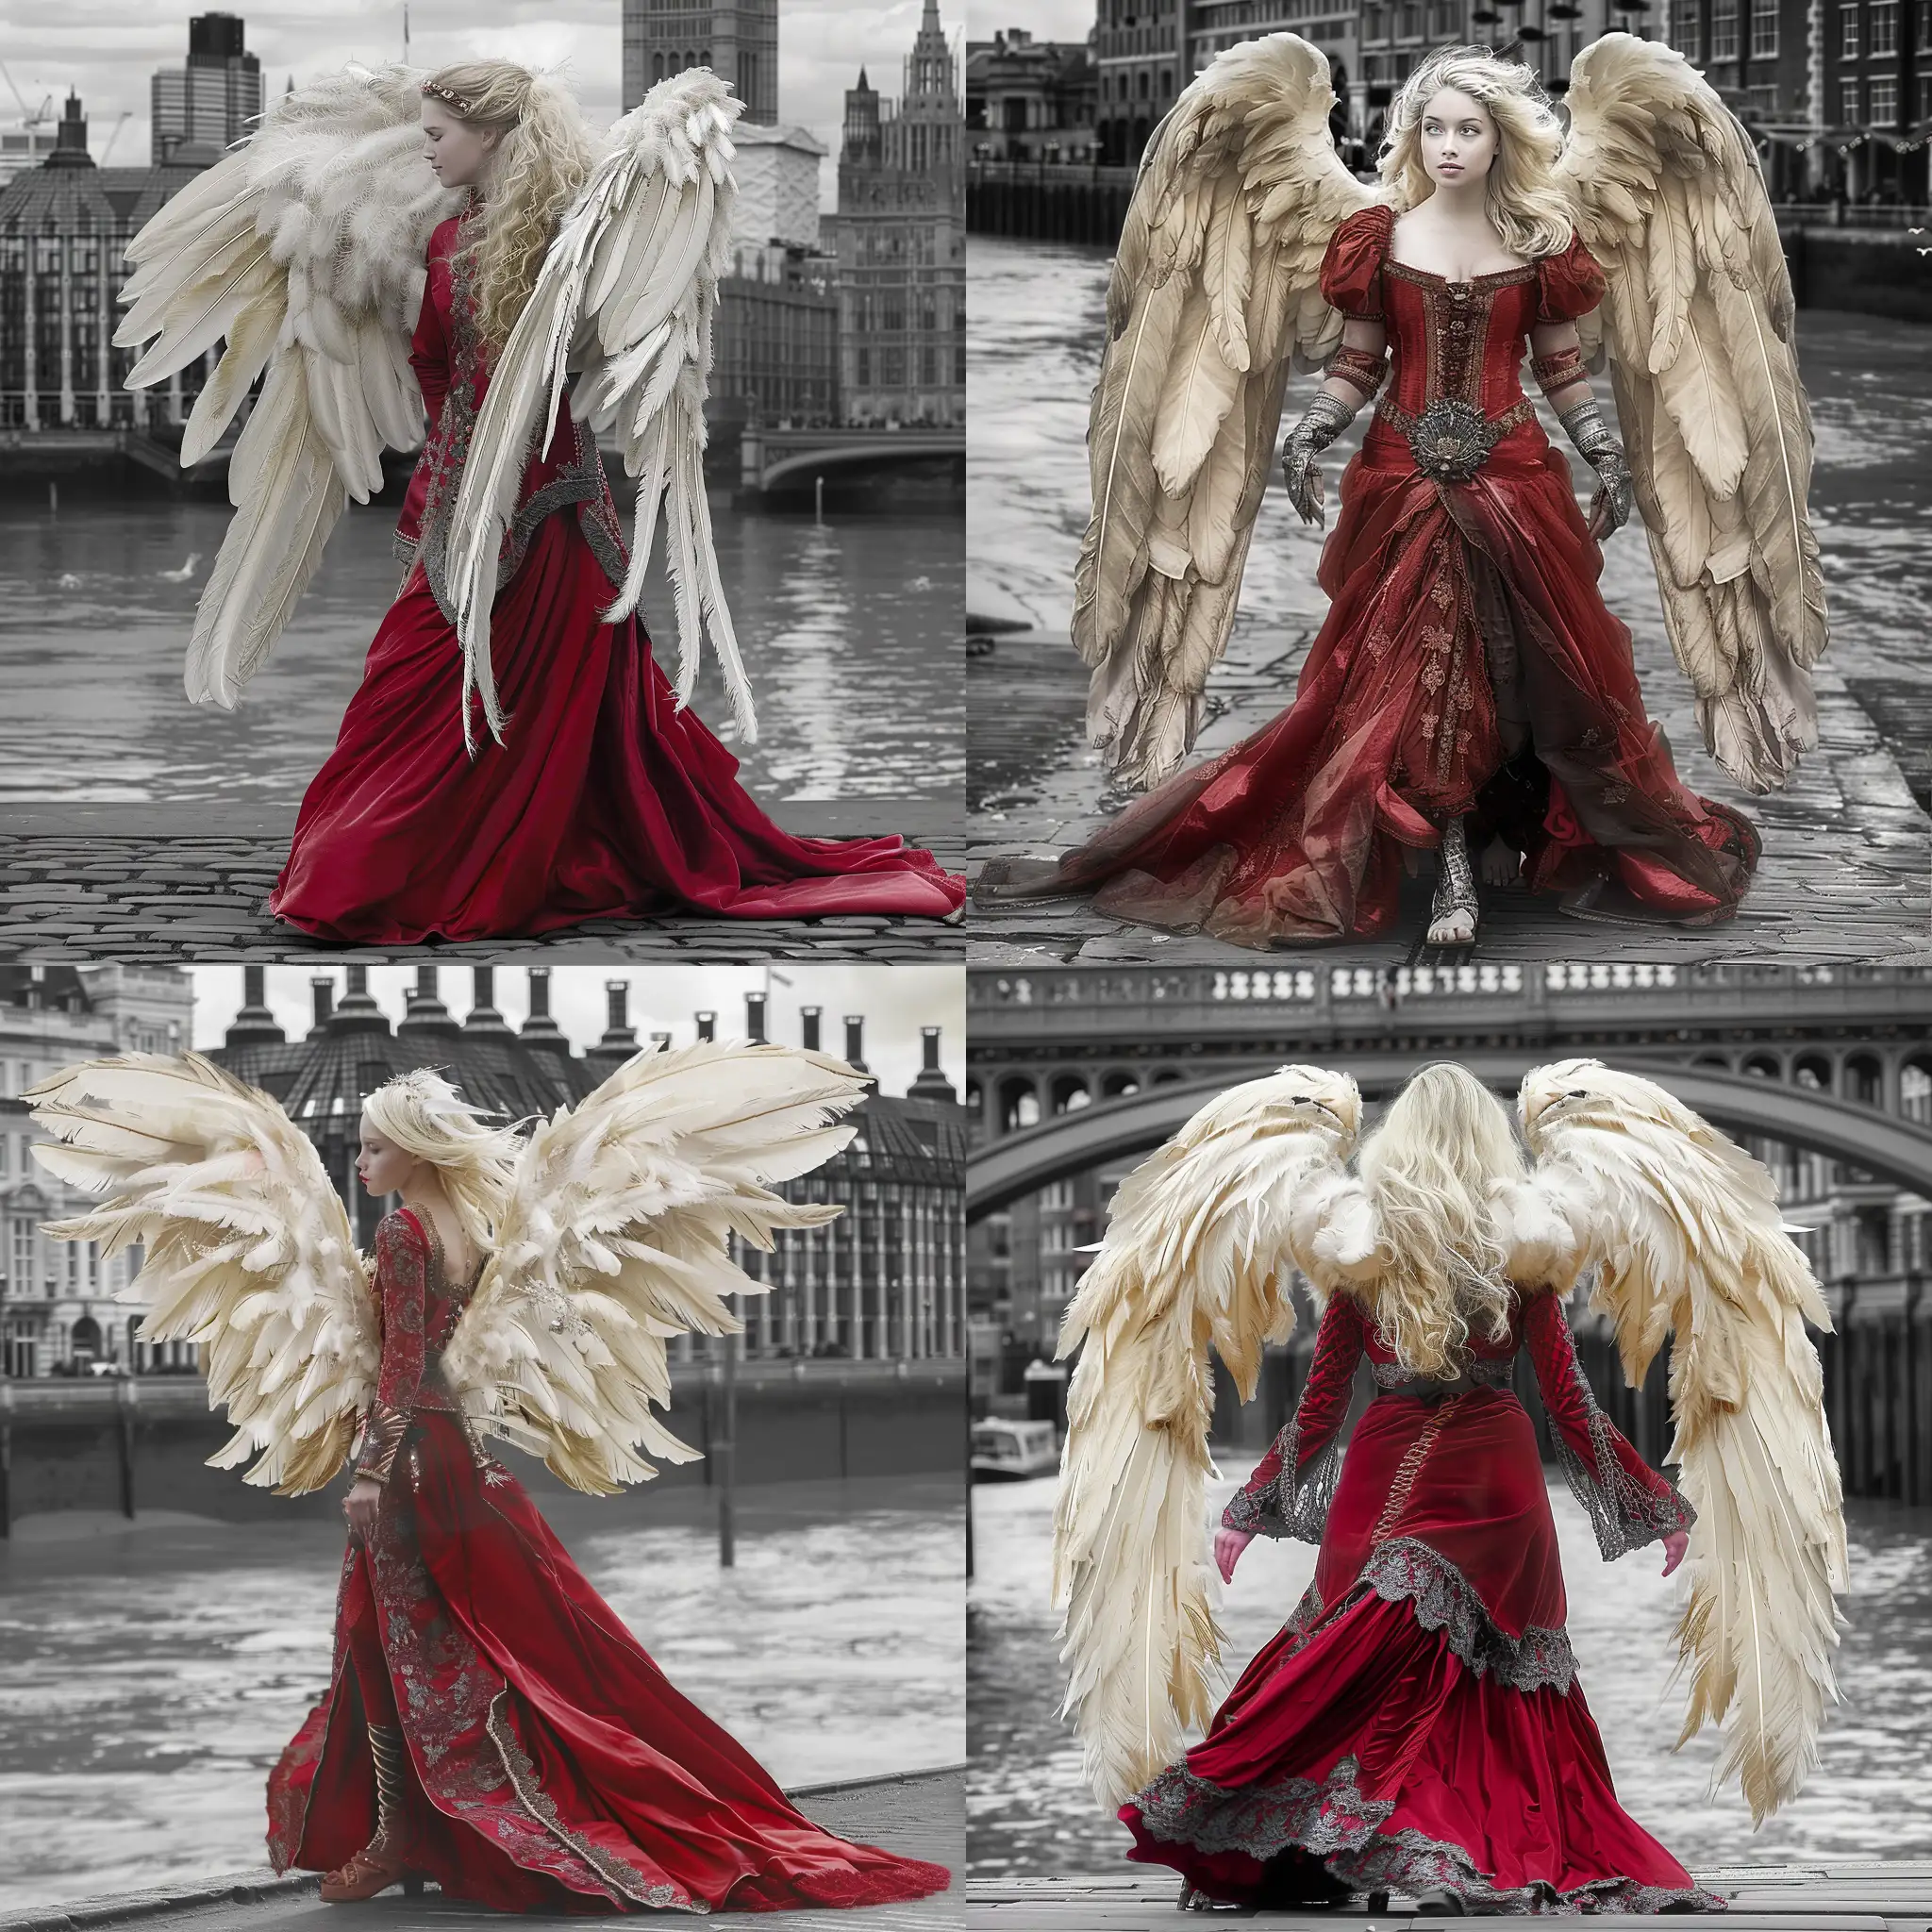 Blonde-Angel-Woman-in-Red-Medieval-Dress-Strolling-London-by-Thames